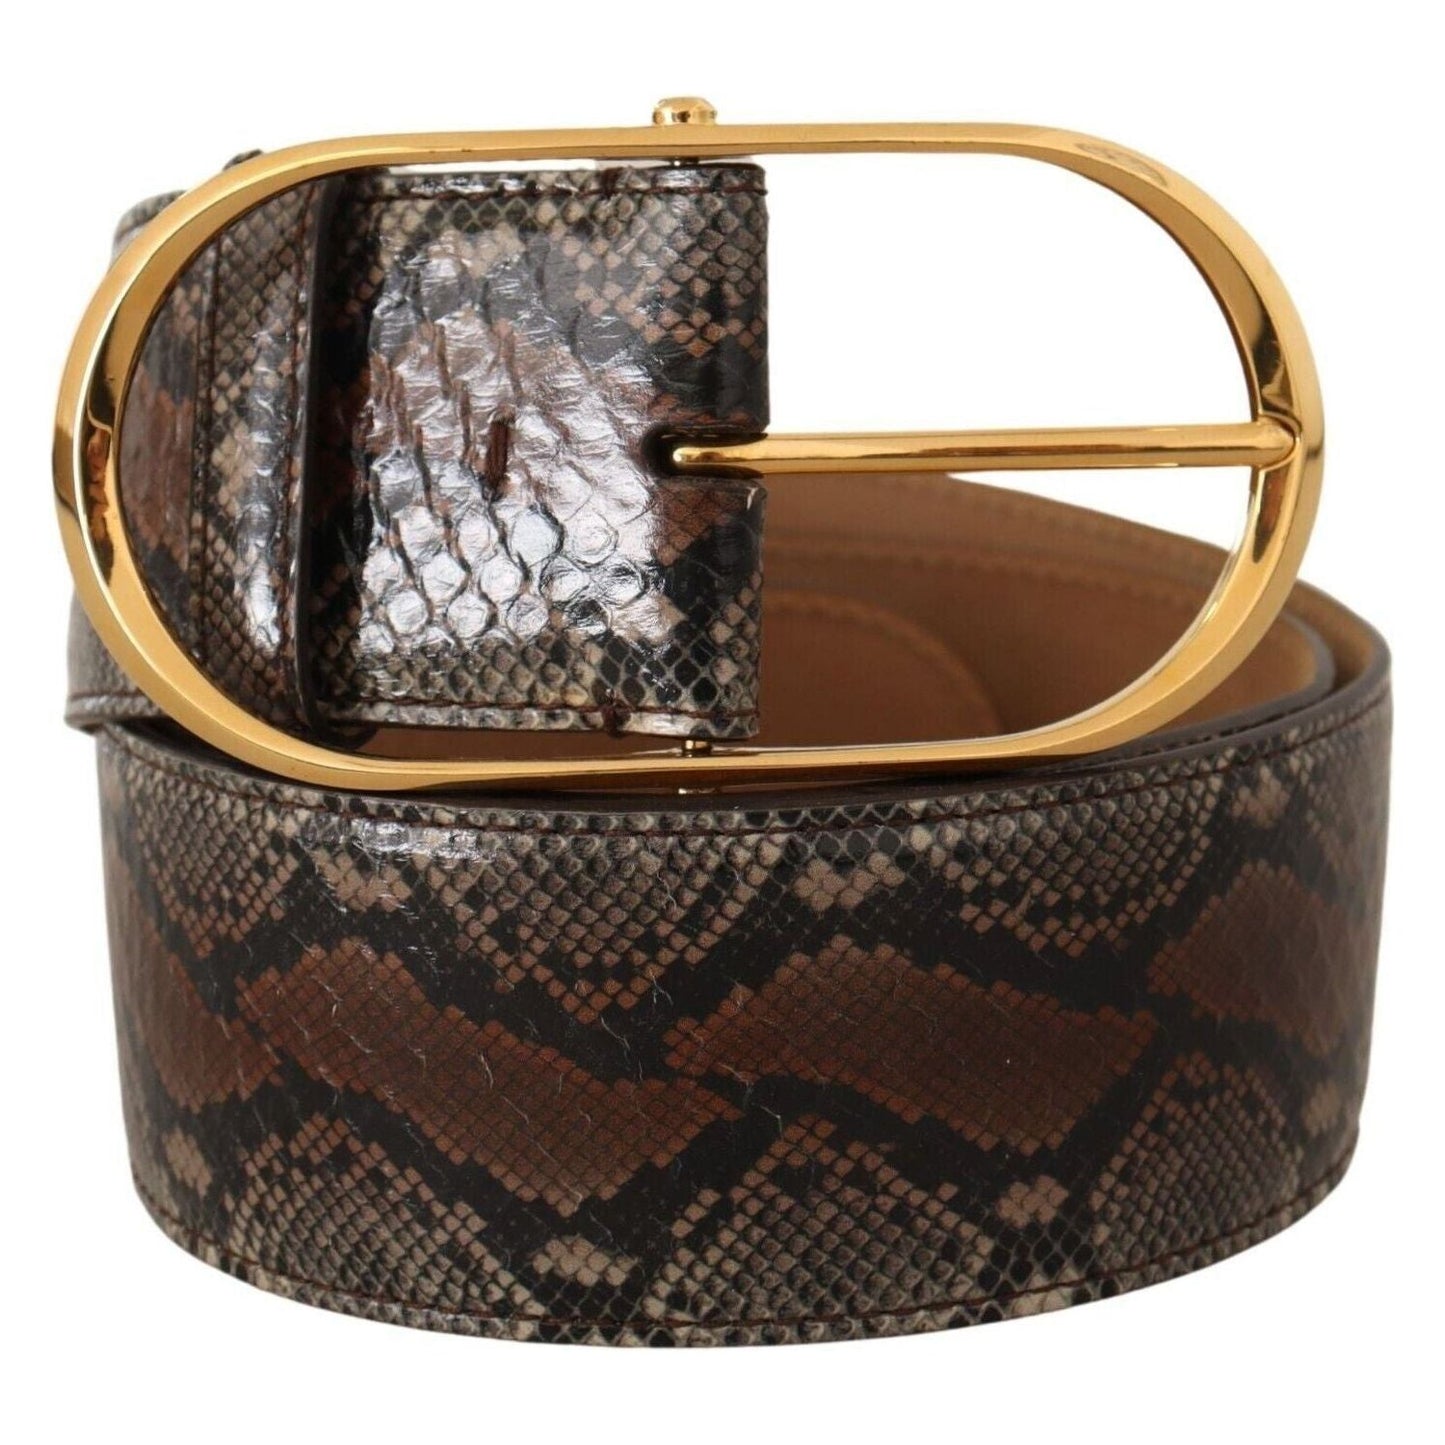 Dolce & Gabbana Elegant Brown Leather Belt with Gold Buckle brown-exotic-leather-gold-oval-buckle-belt-5 WOMAN BELTS s-l1600-1-278-47700b6f-551.jpg